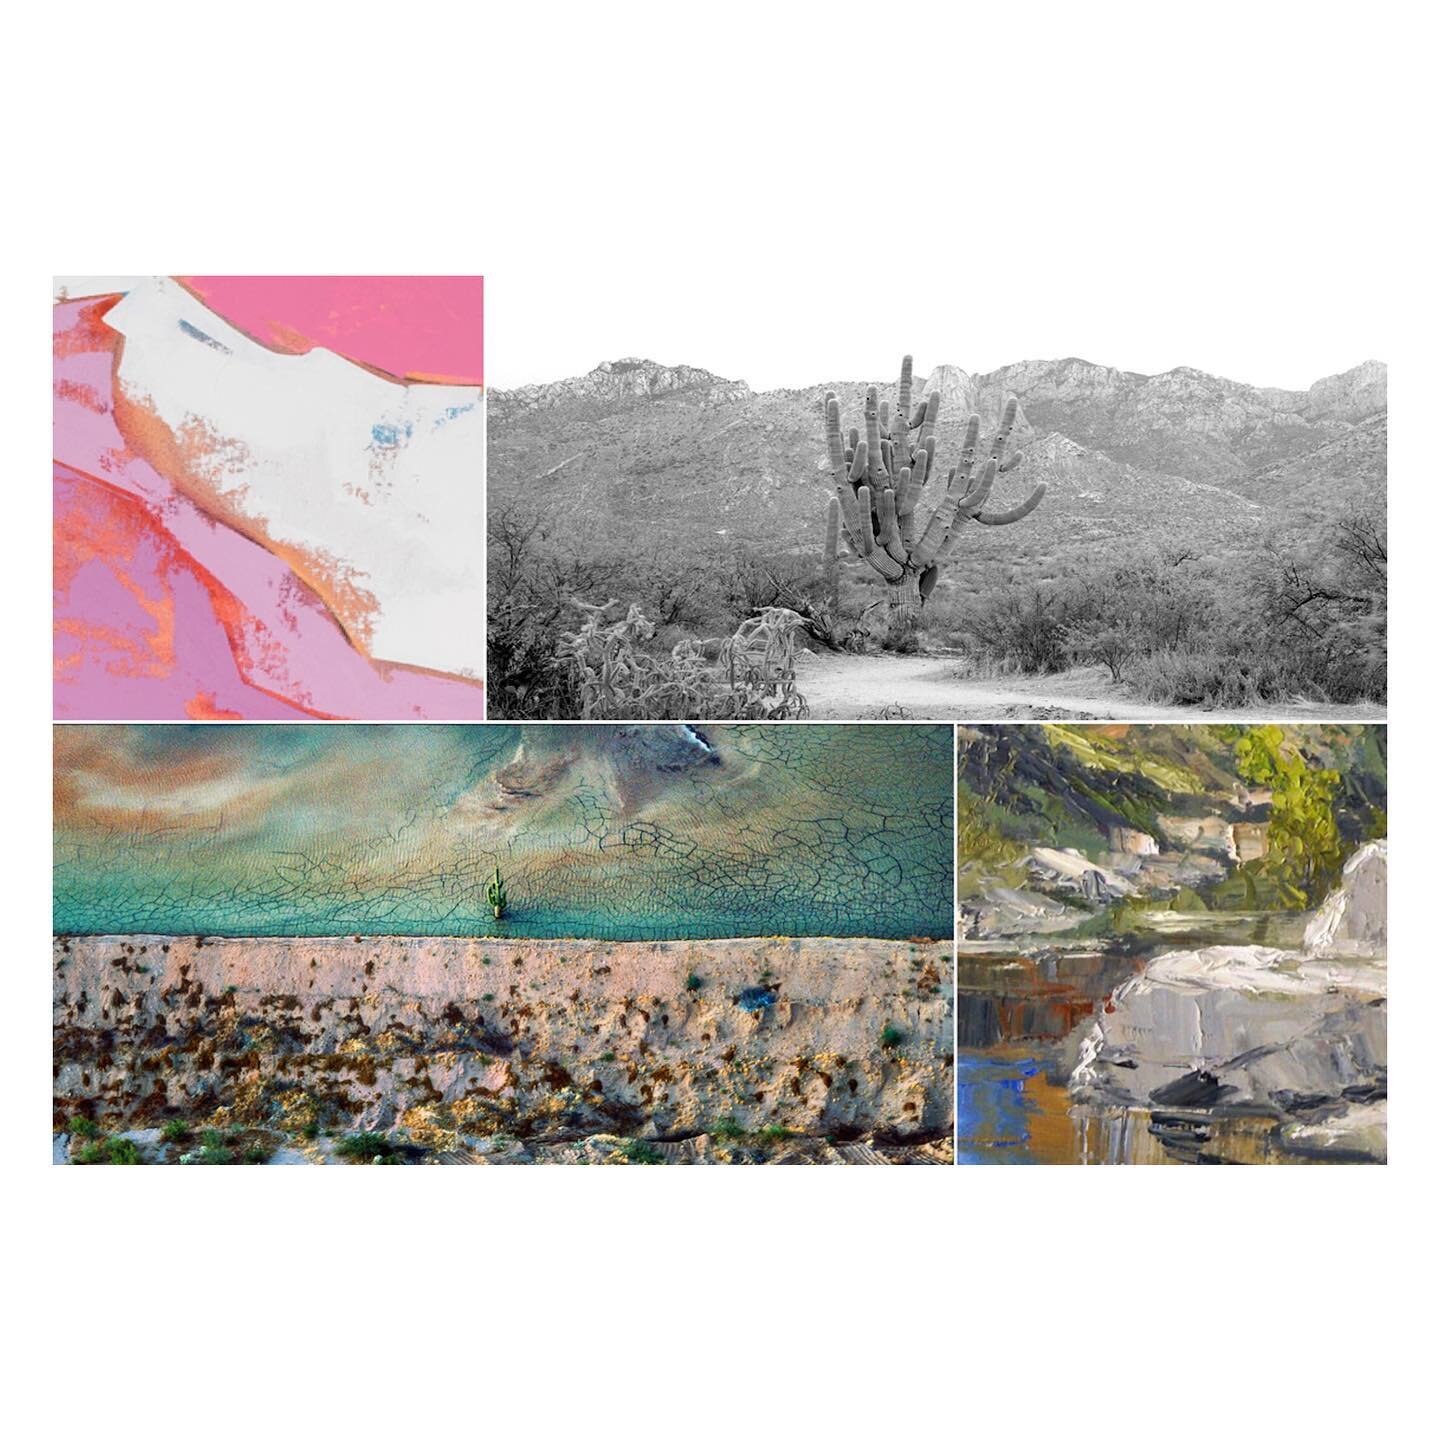 A busy month for incredible art exhibitions!

Excited to announce that I was juried into an incredible exhibition in Tucson at the wonderful @tohonochul. 

Thank you for having my painting in an exhibition that explores the diverse Arizona landscapes